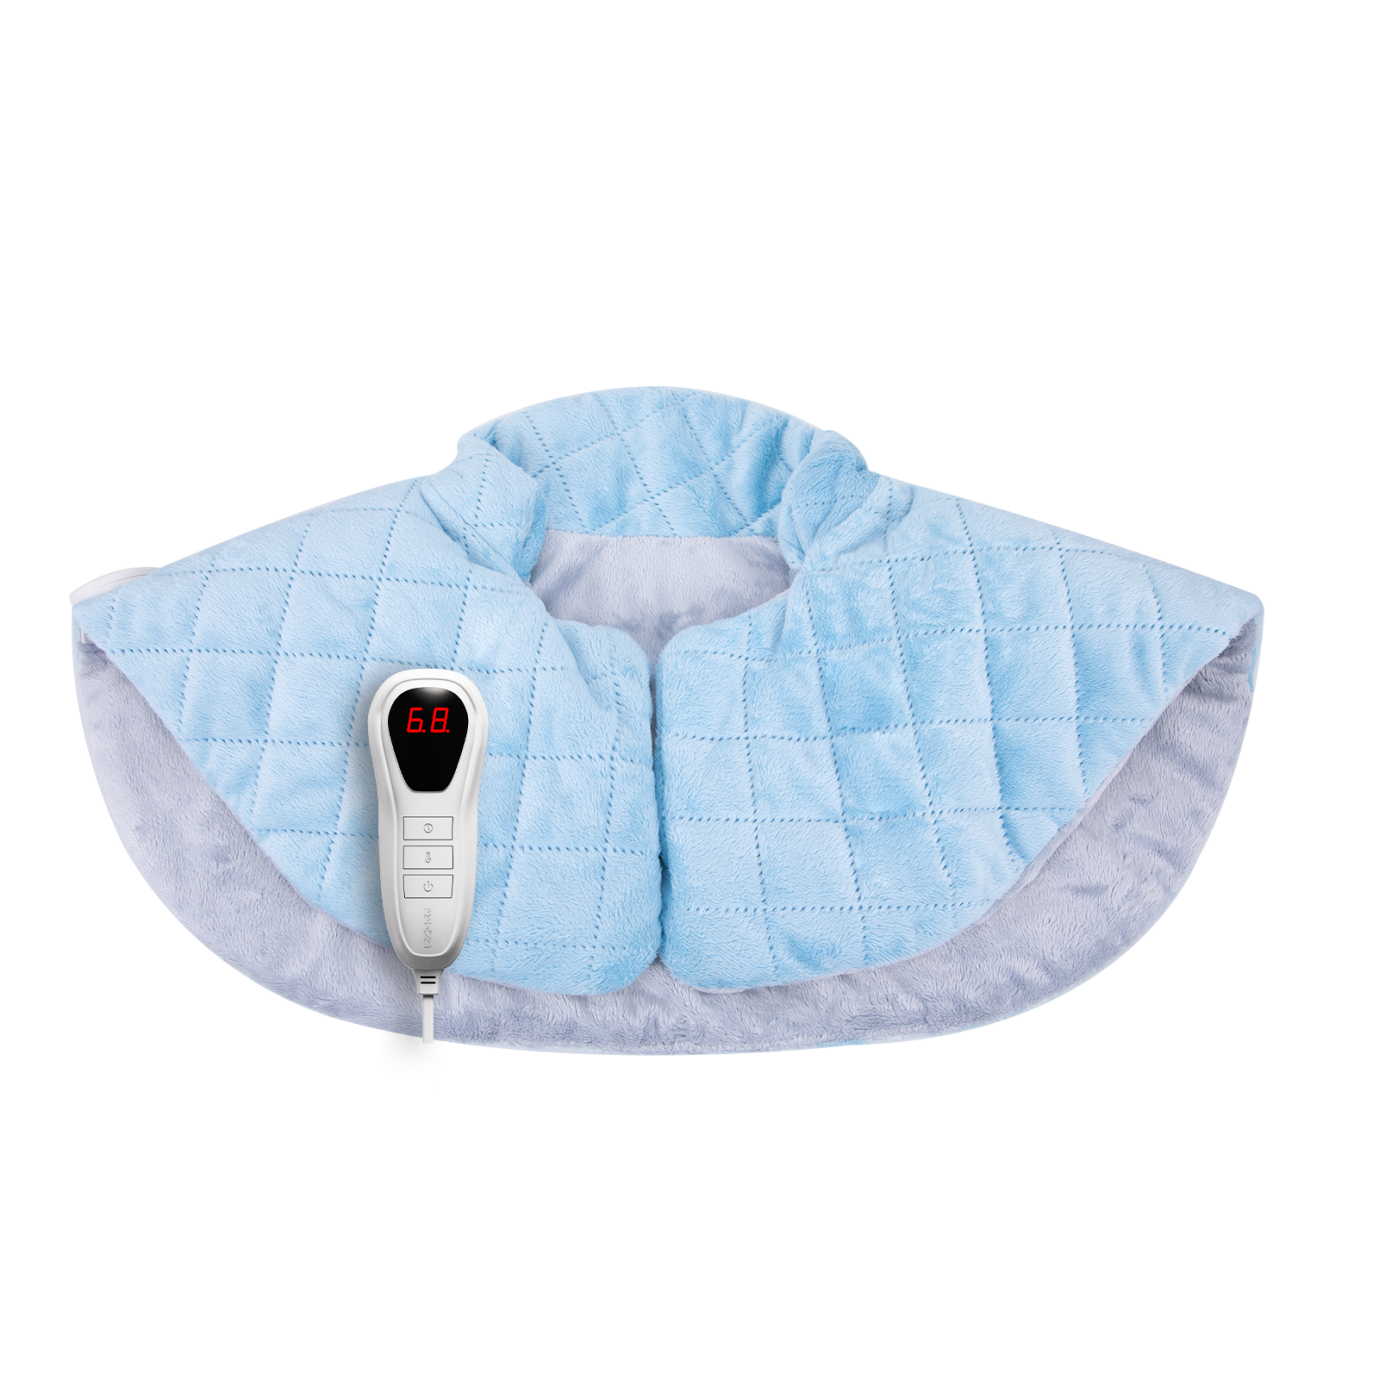 Heating Pad for Neck and Shoulder Pain Relief with Auto Shut Off Winter Warmers